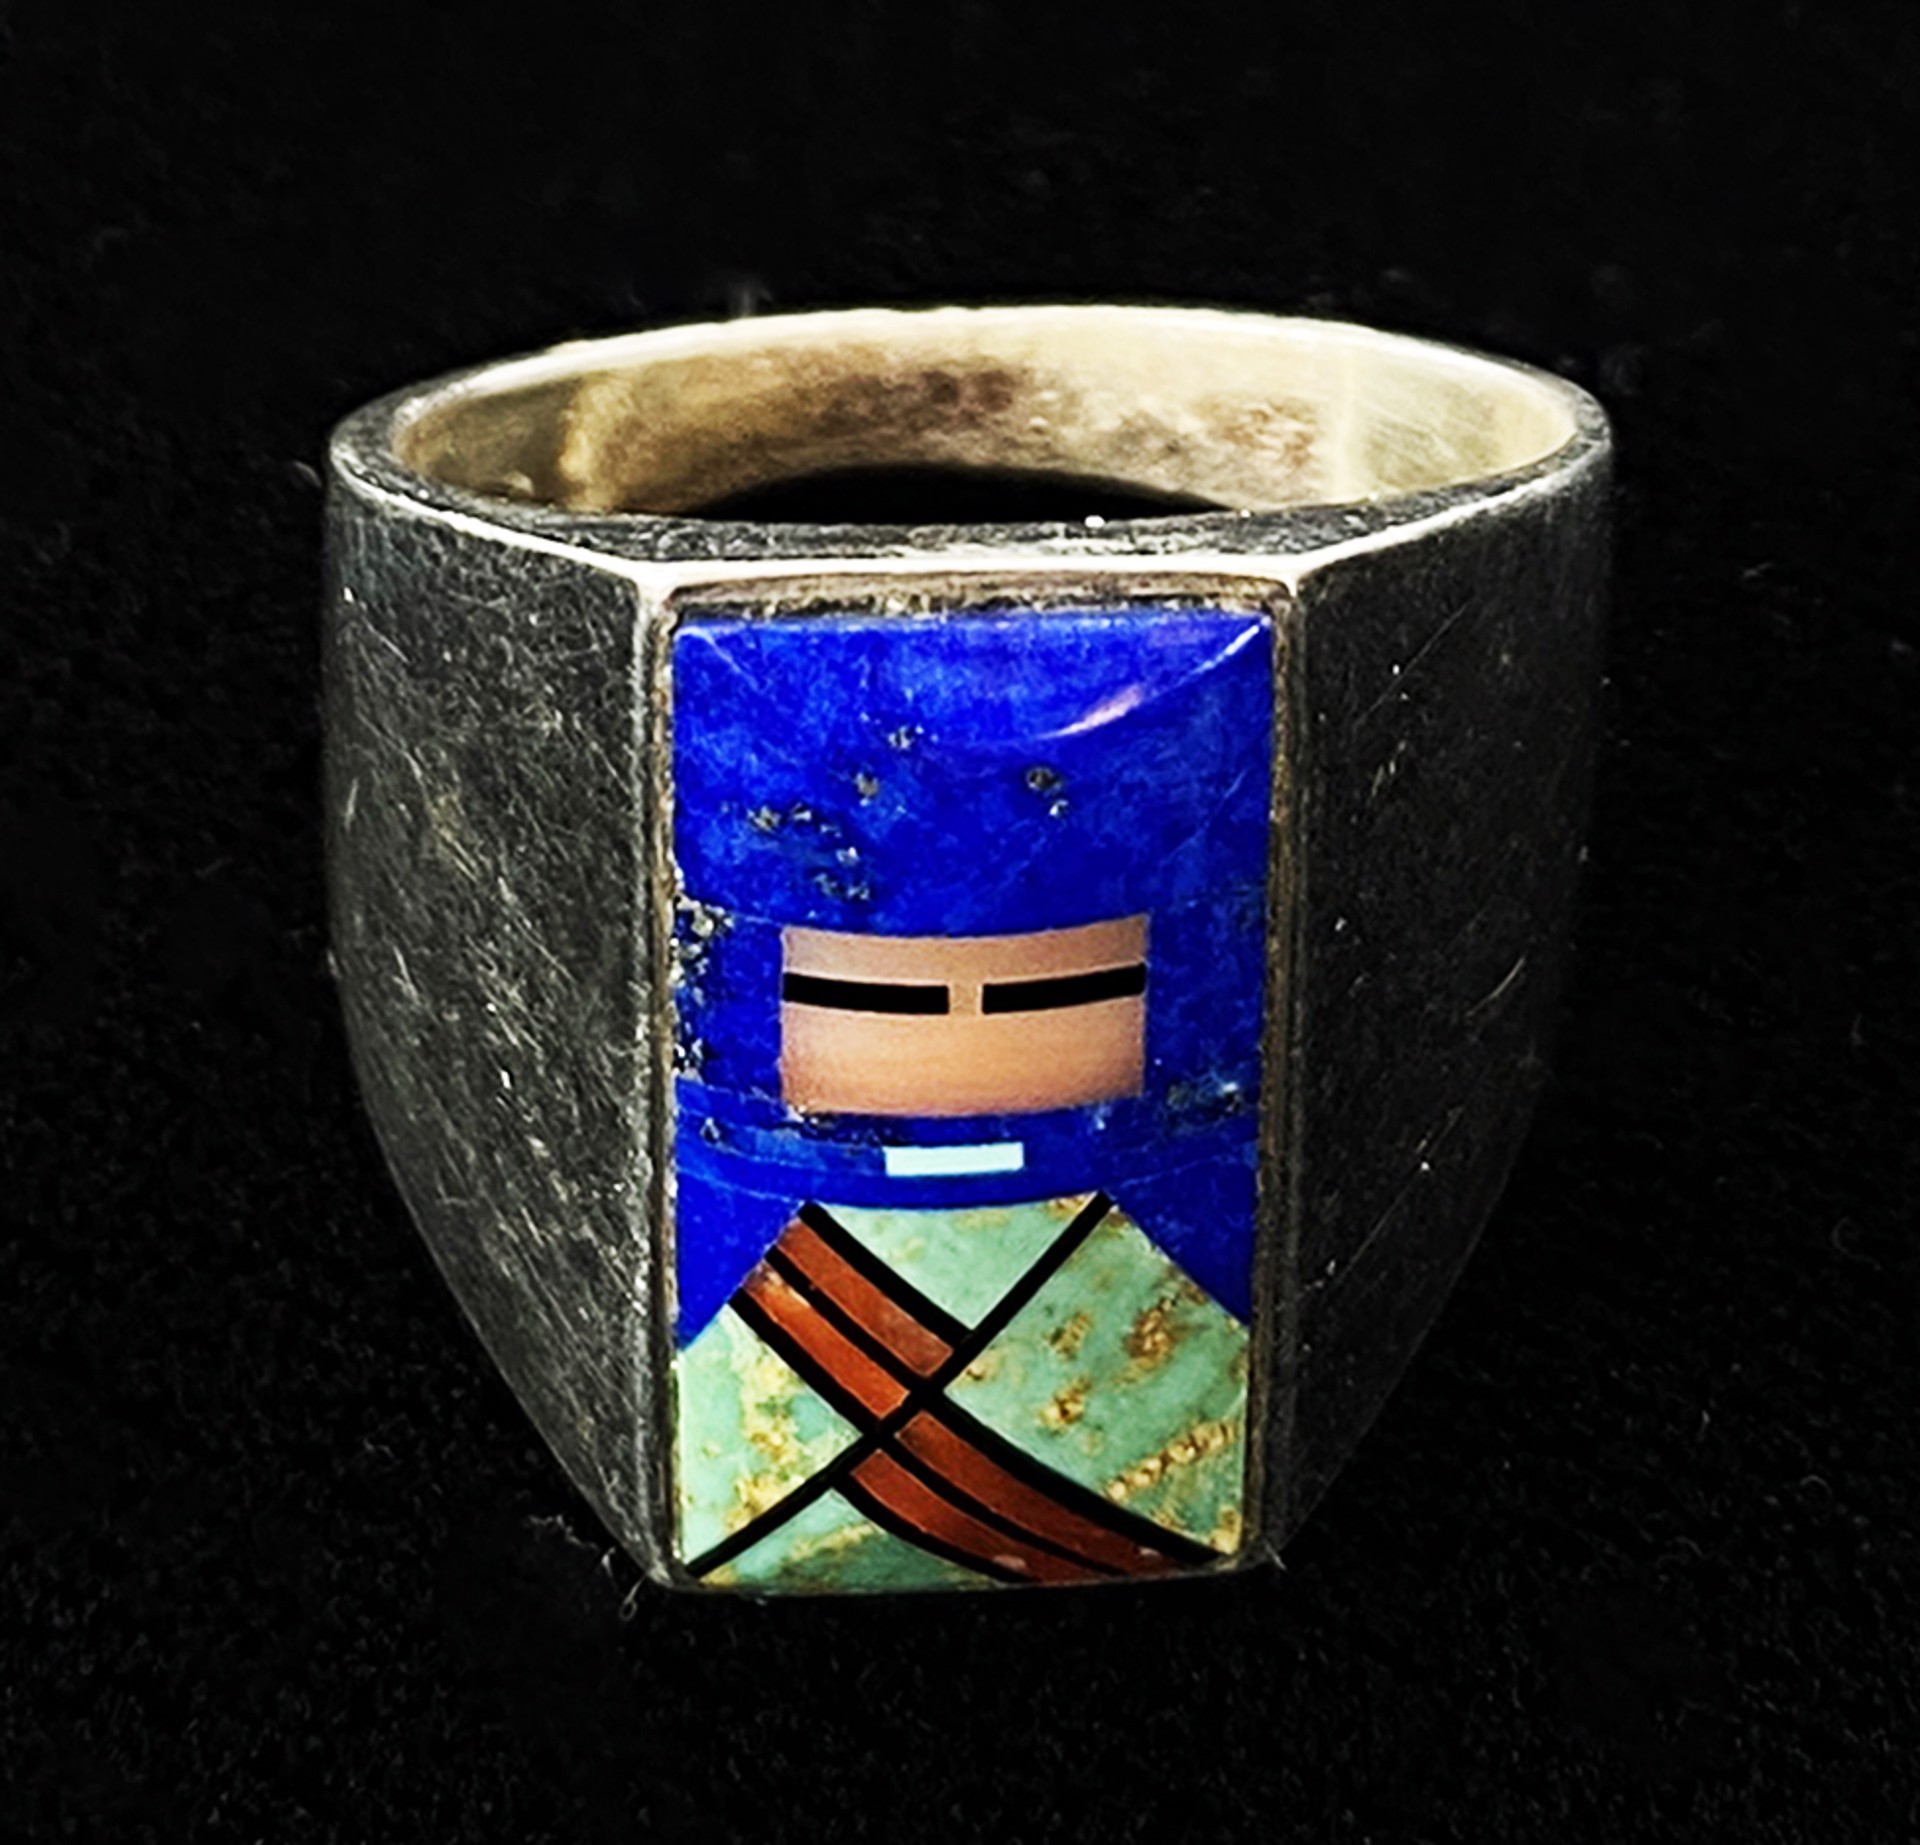 Kimono Inlay Ring by Artist Unknown